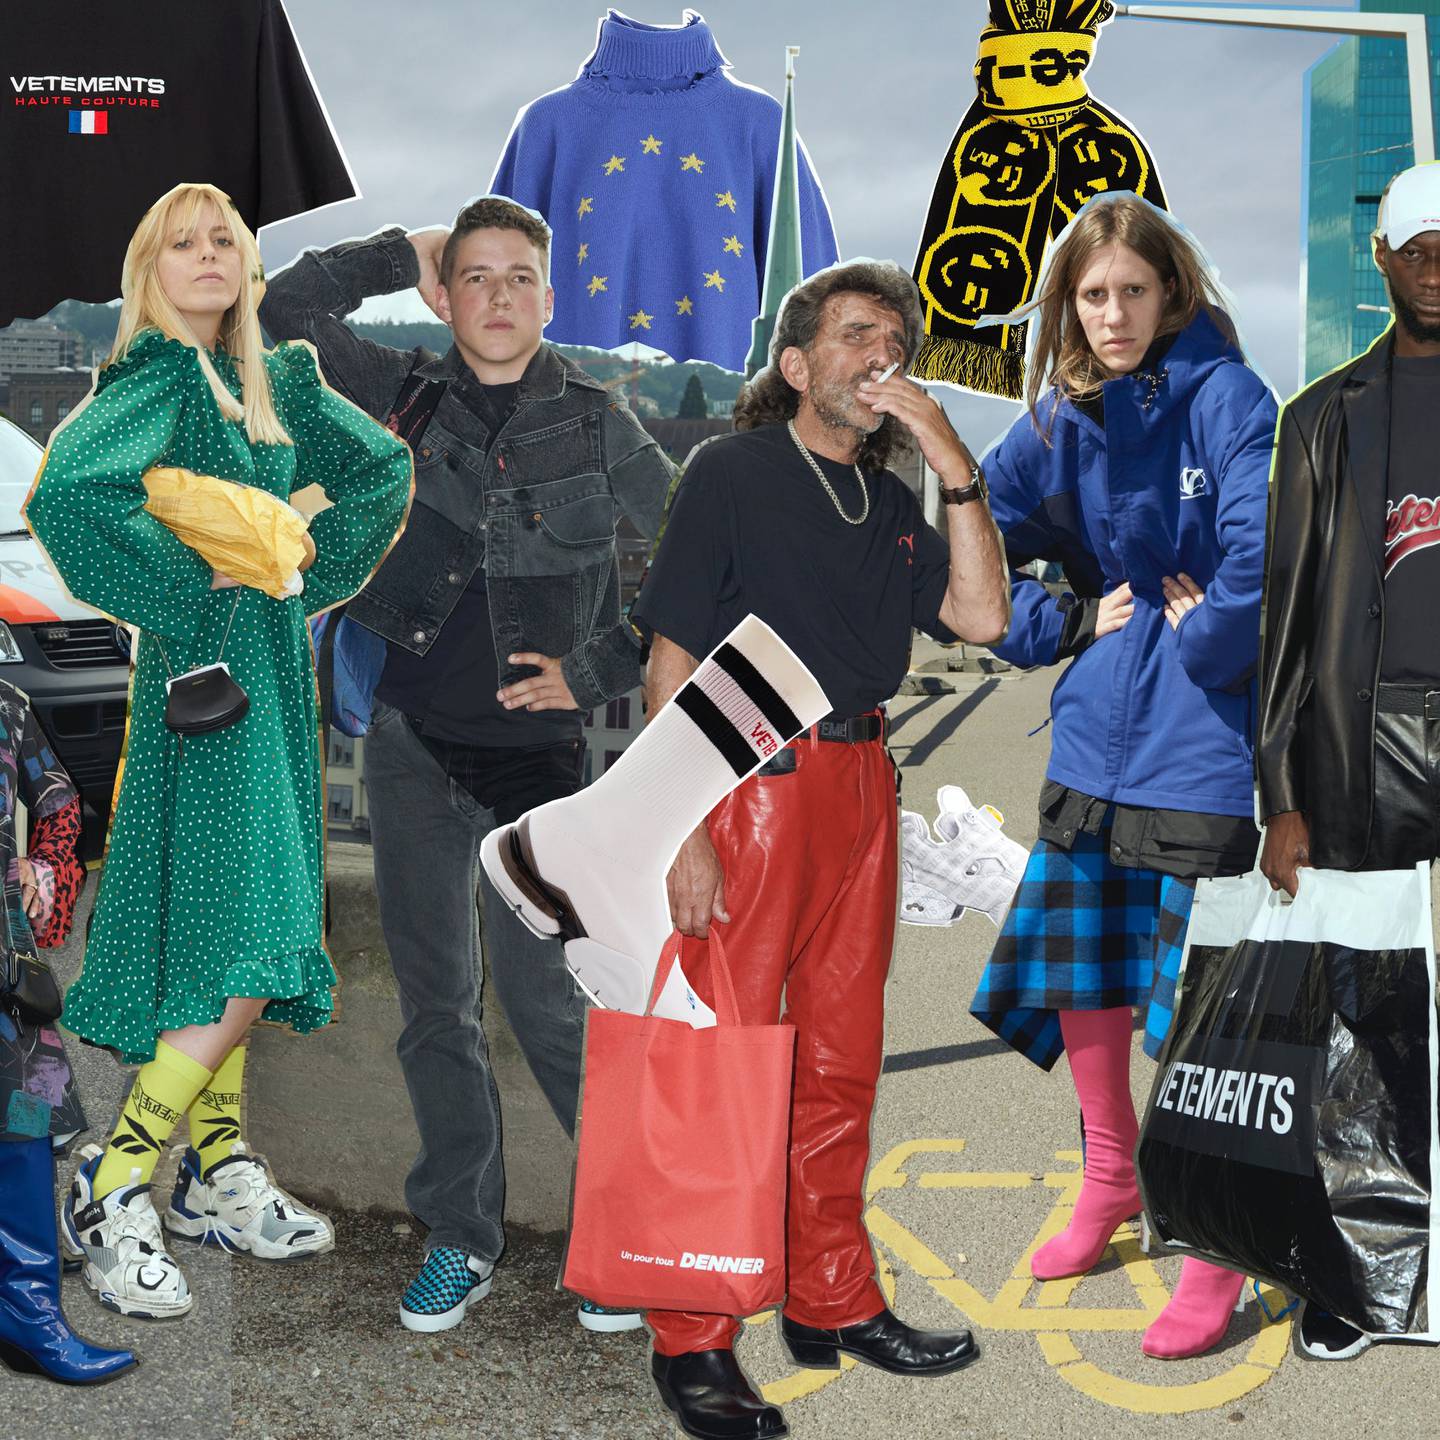 The Truth About Vetements | BoF